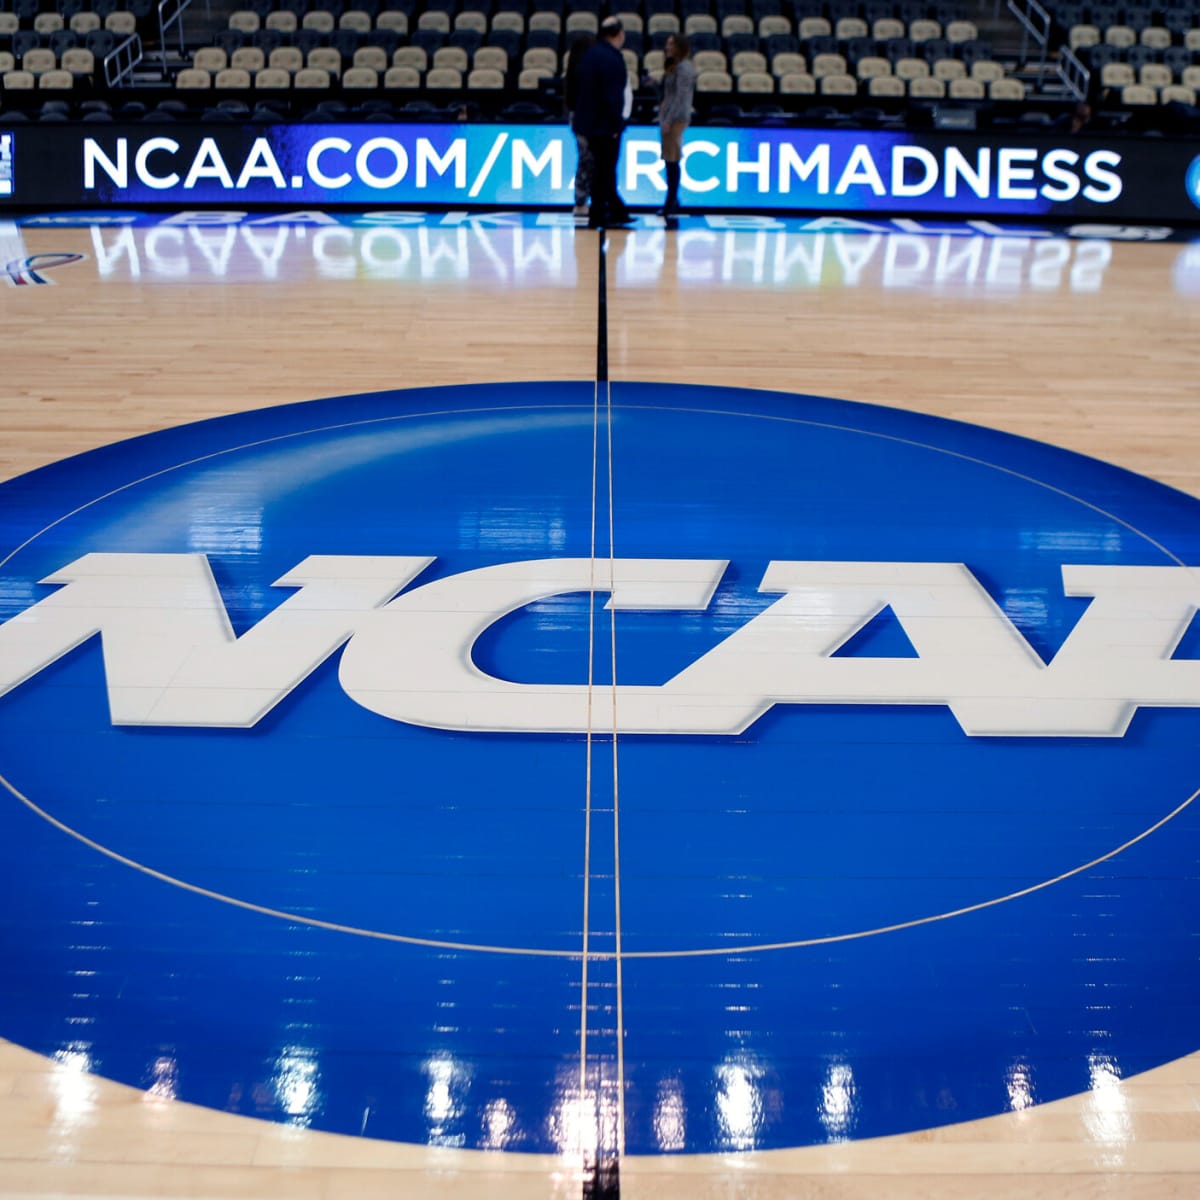 DI Men's Basketball Committee discusses tournament expansion